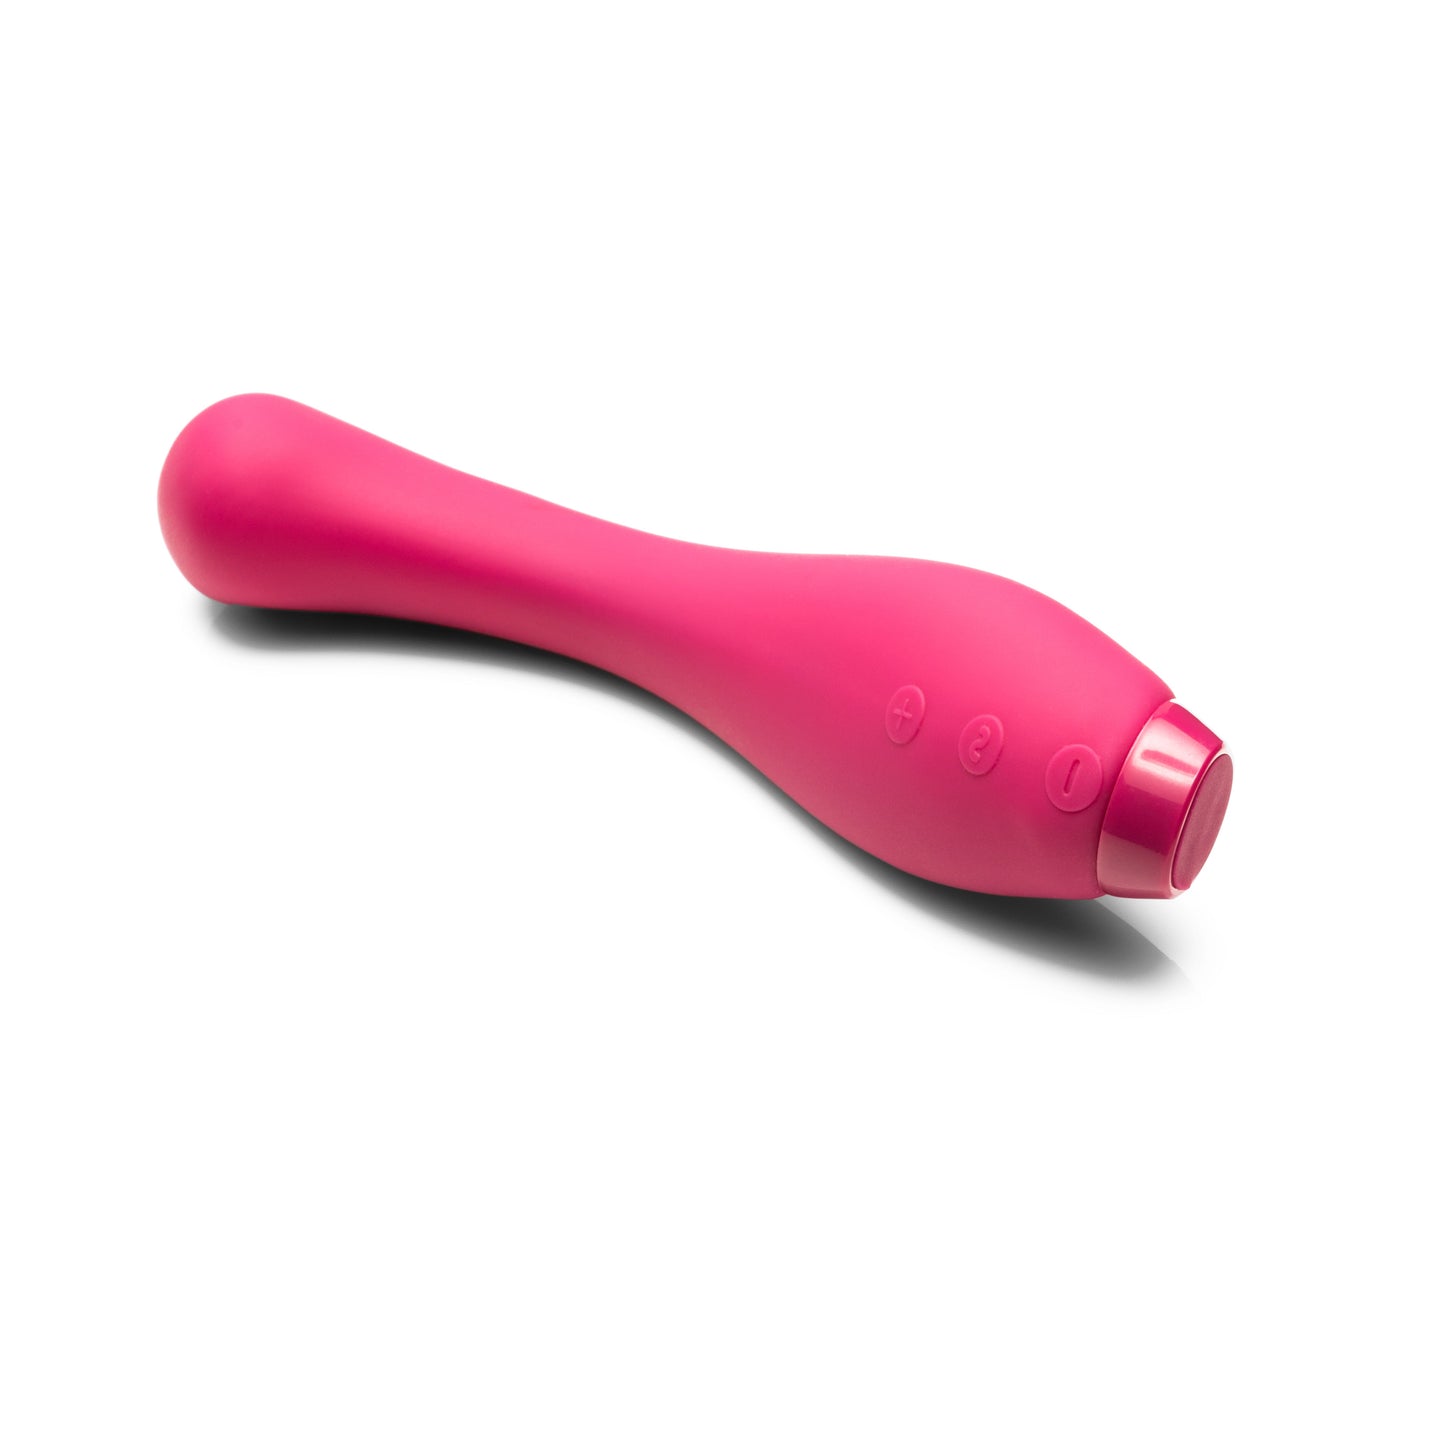 Juno G-Spot Vibrator Squishy Tip for Targeted Stimulation